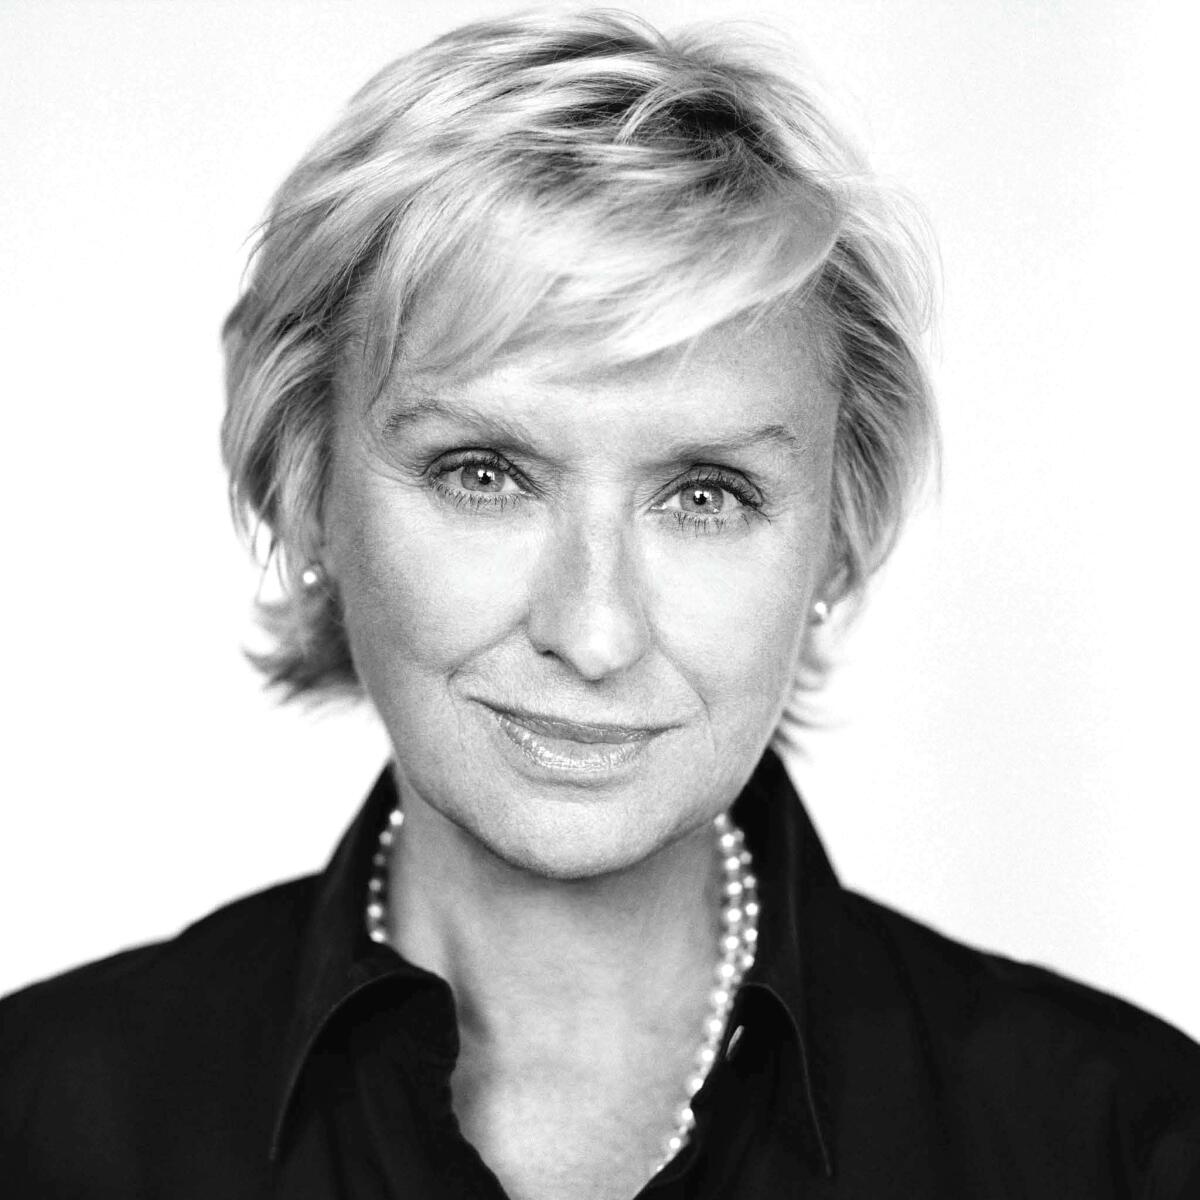 A black-and-white headshot Tina Brown with short hair, wearing pearls.